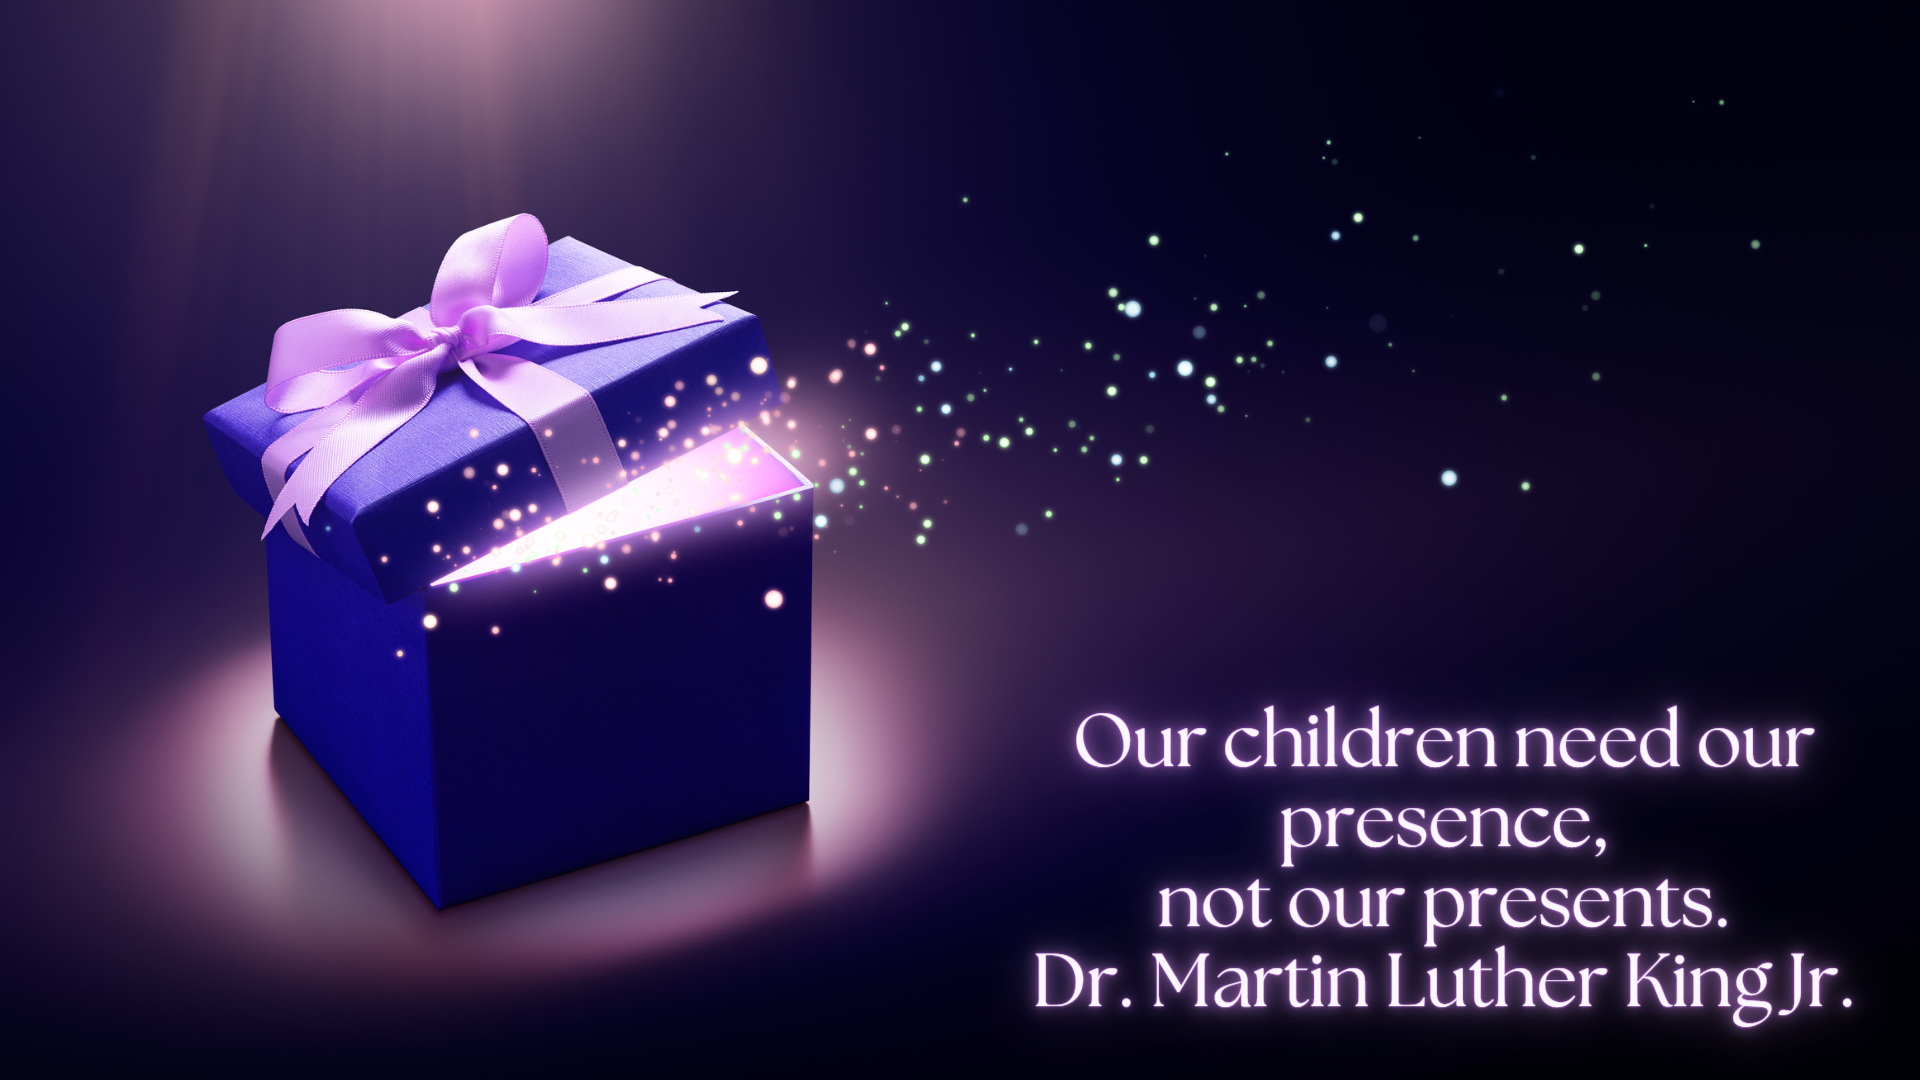 Contest submission titled "A Gift." An image of an open gift box with sparkling circles emerging from it, with text that reads "Our children need our presence, not our presents. Dr. Martin Luther King Jr."